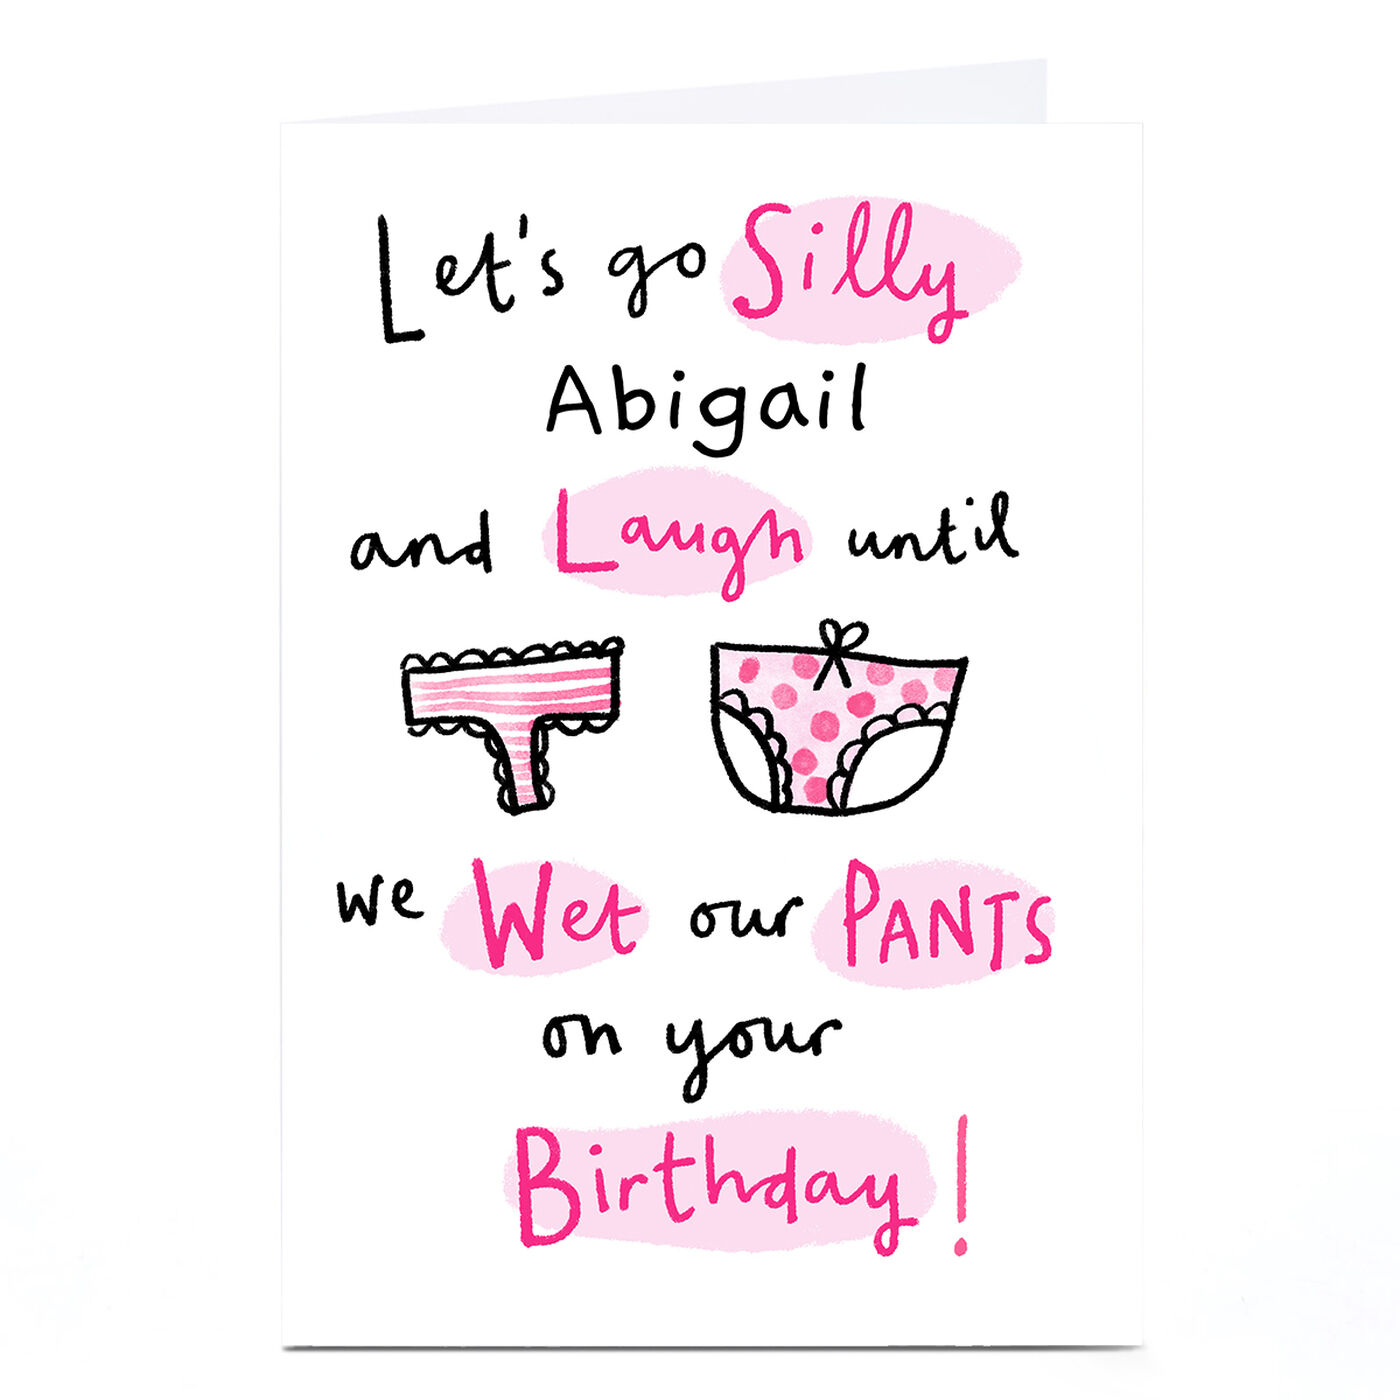 Buy Personalised Lindsay Kirby Birthday Card - Wet Our Pants for GBP 2. ...